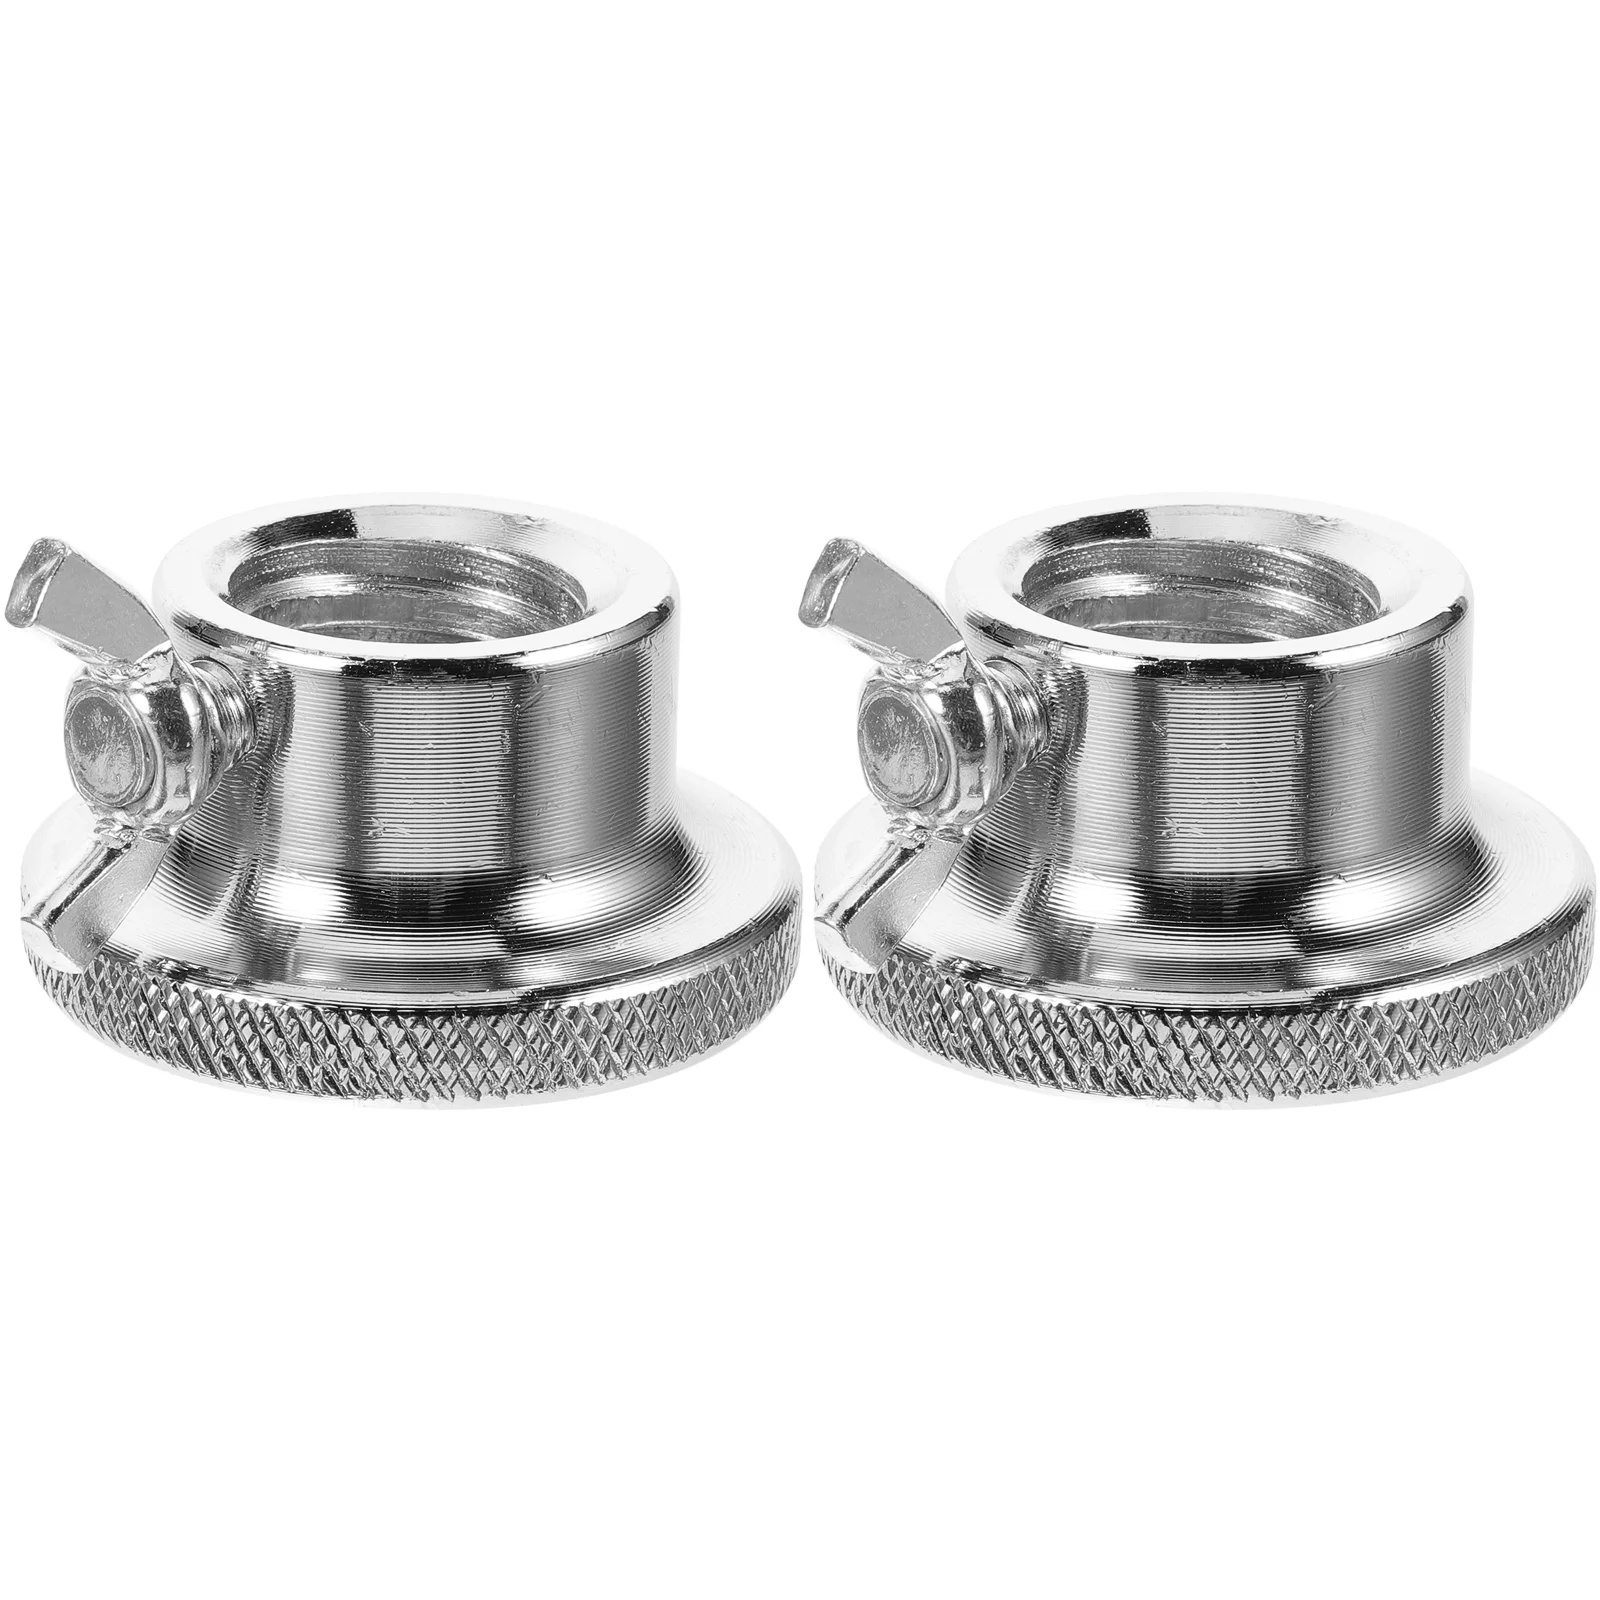 

Pair of Double Spinlock Collars For 1Inch Dumbbell Bars, 25cm Hex Nut- Dumbbell Bars Replacement Accessories